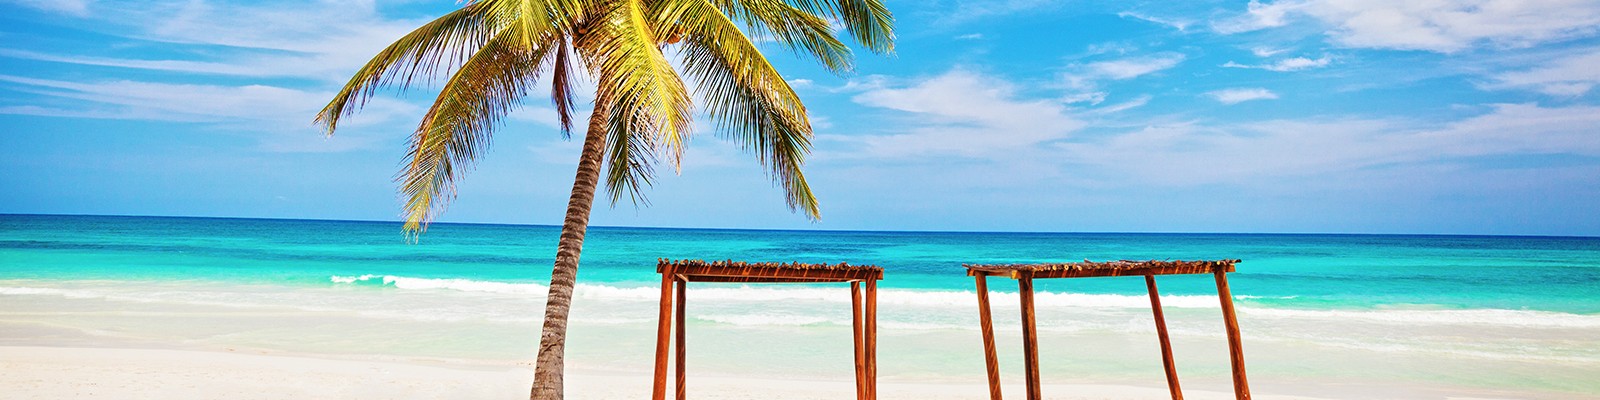 mexico honeymoon packages - header